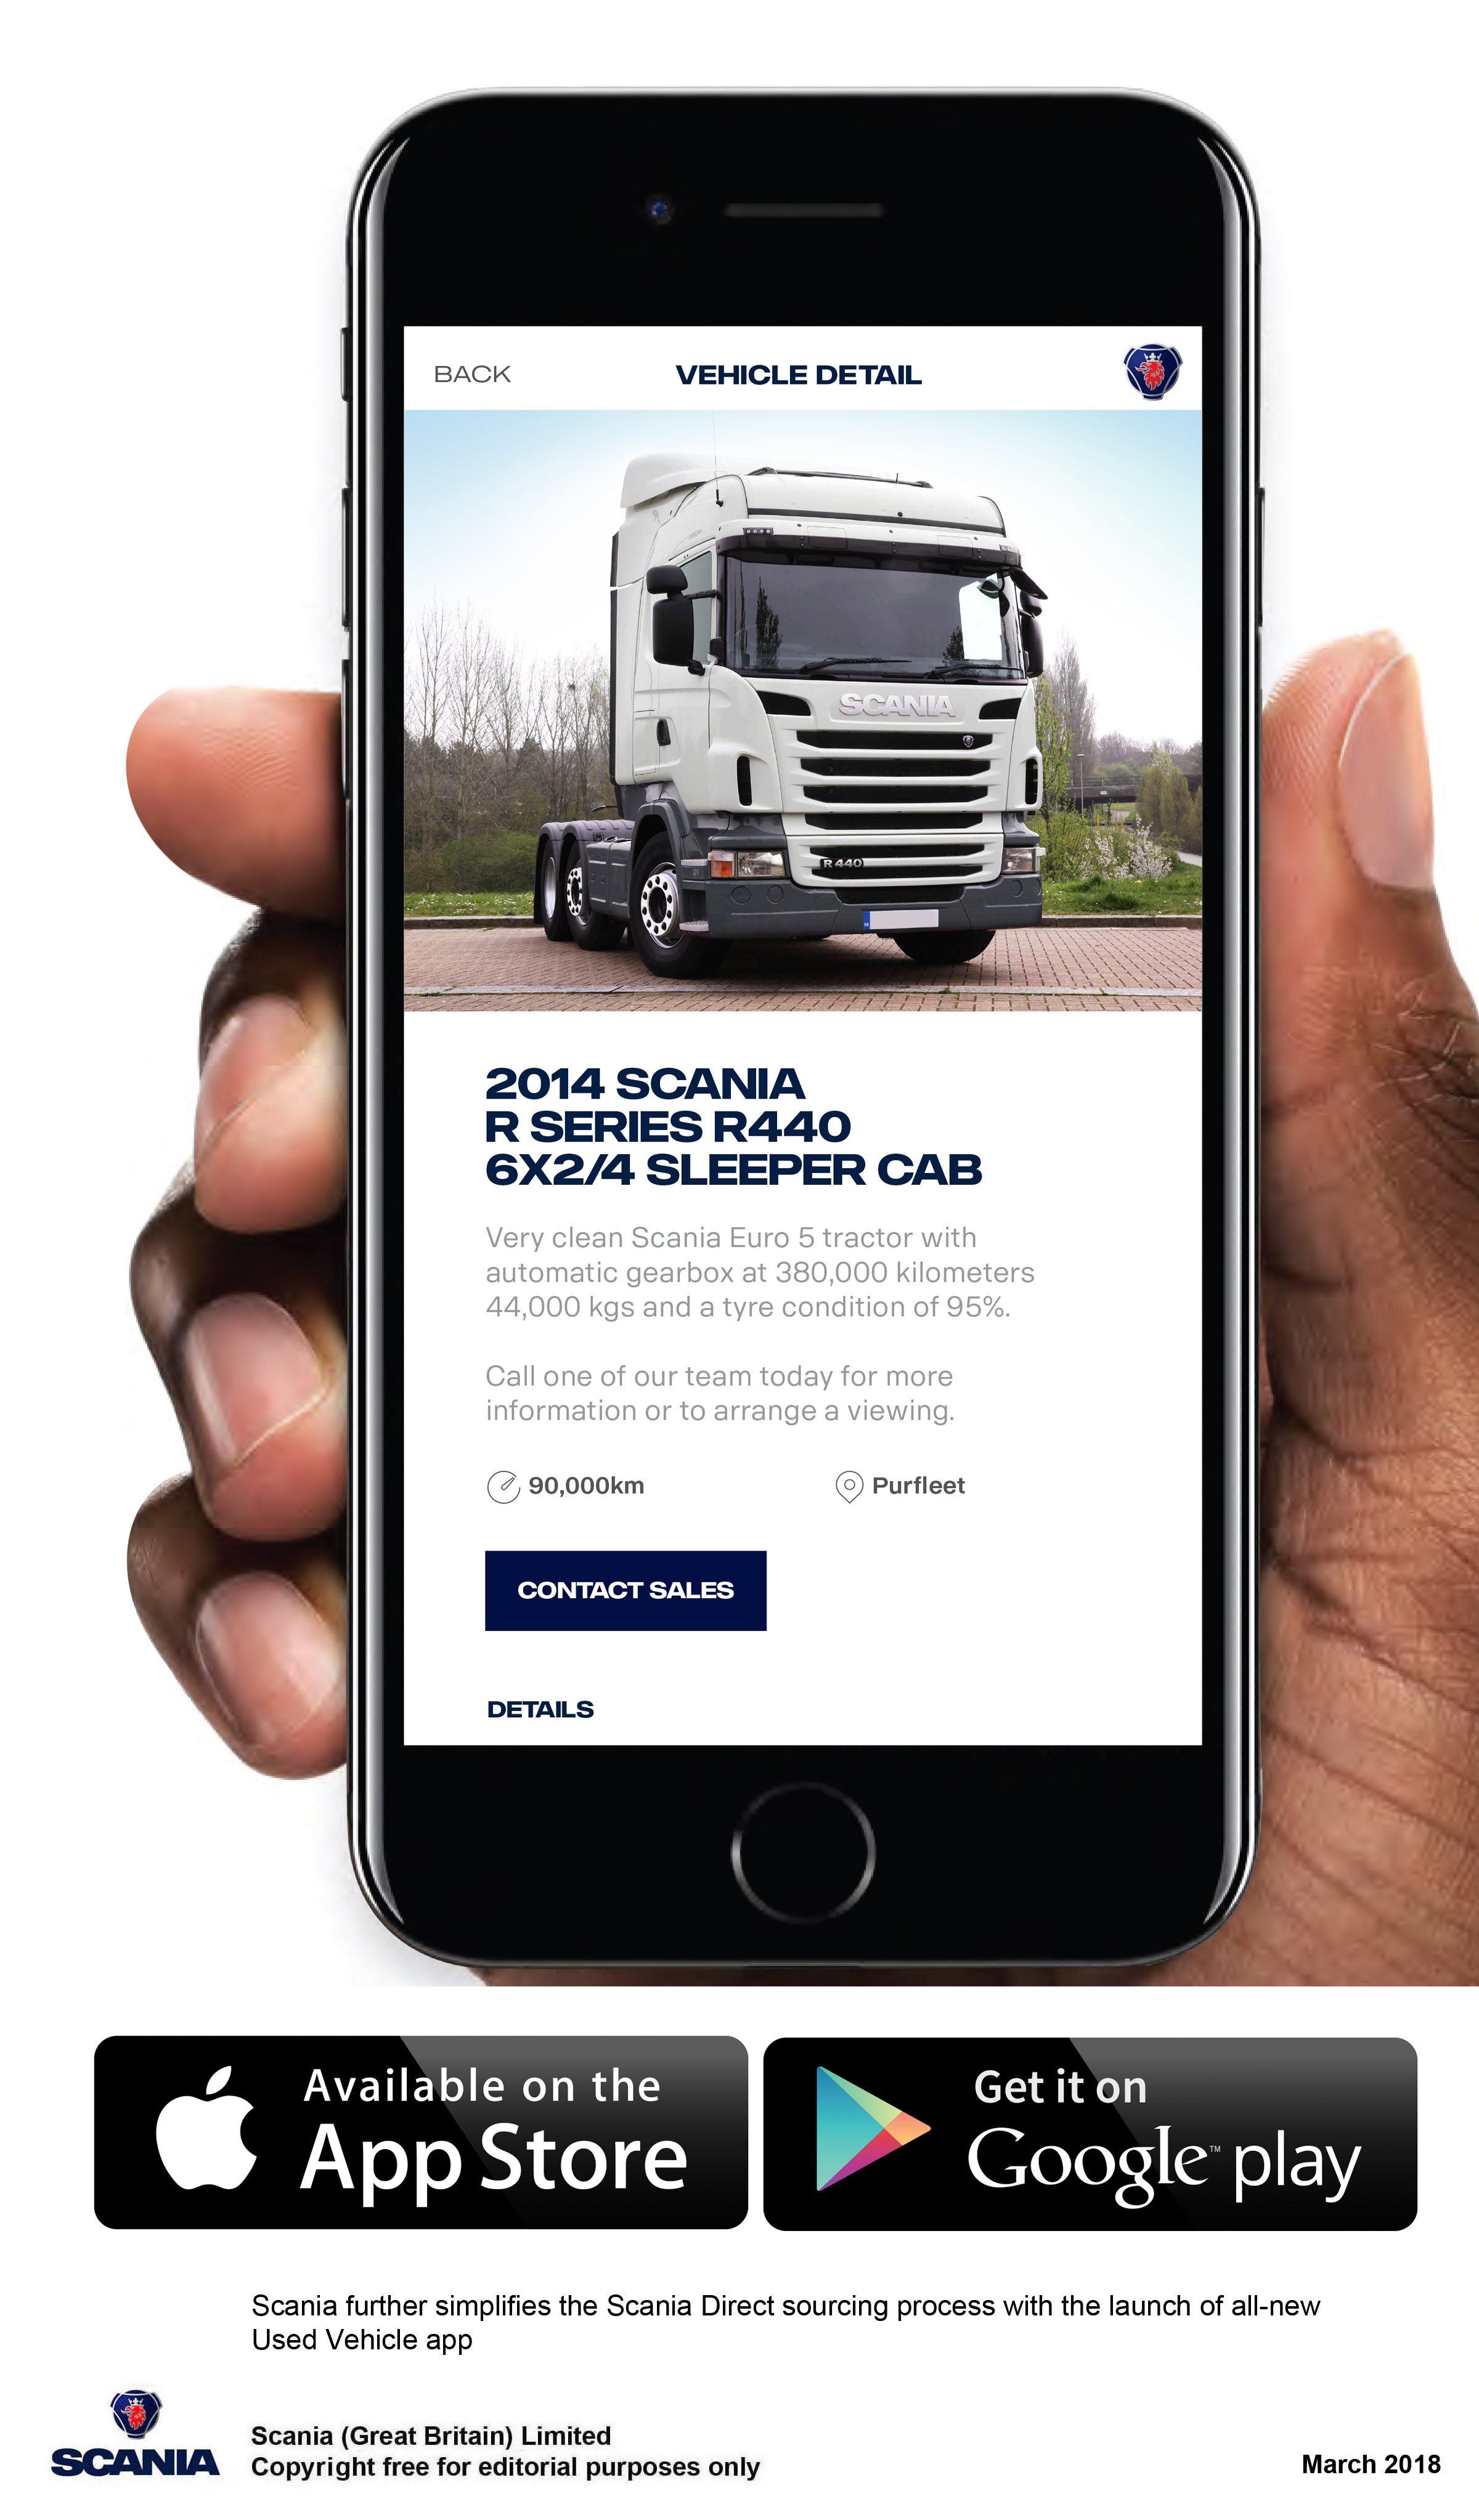 Scania Direct's Used Vehicle App